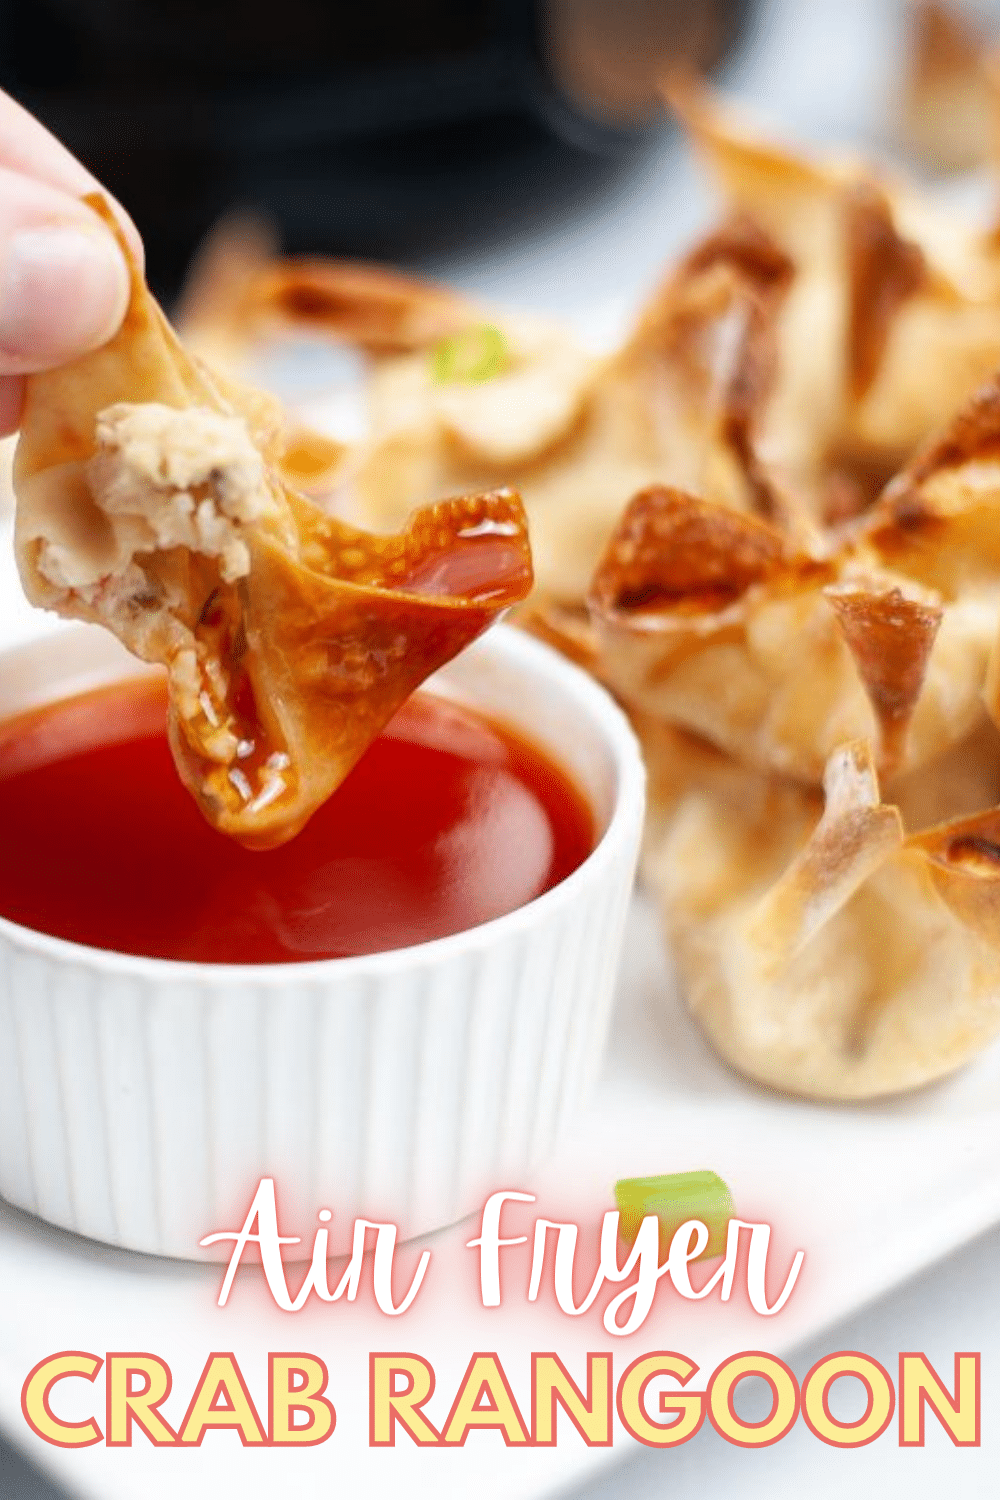 A piece of Air Fryer Crab Rangoon being dipped in a red sauce with the rest of the pieces on a plate